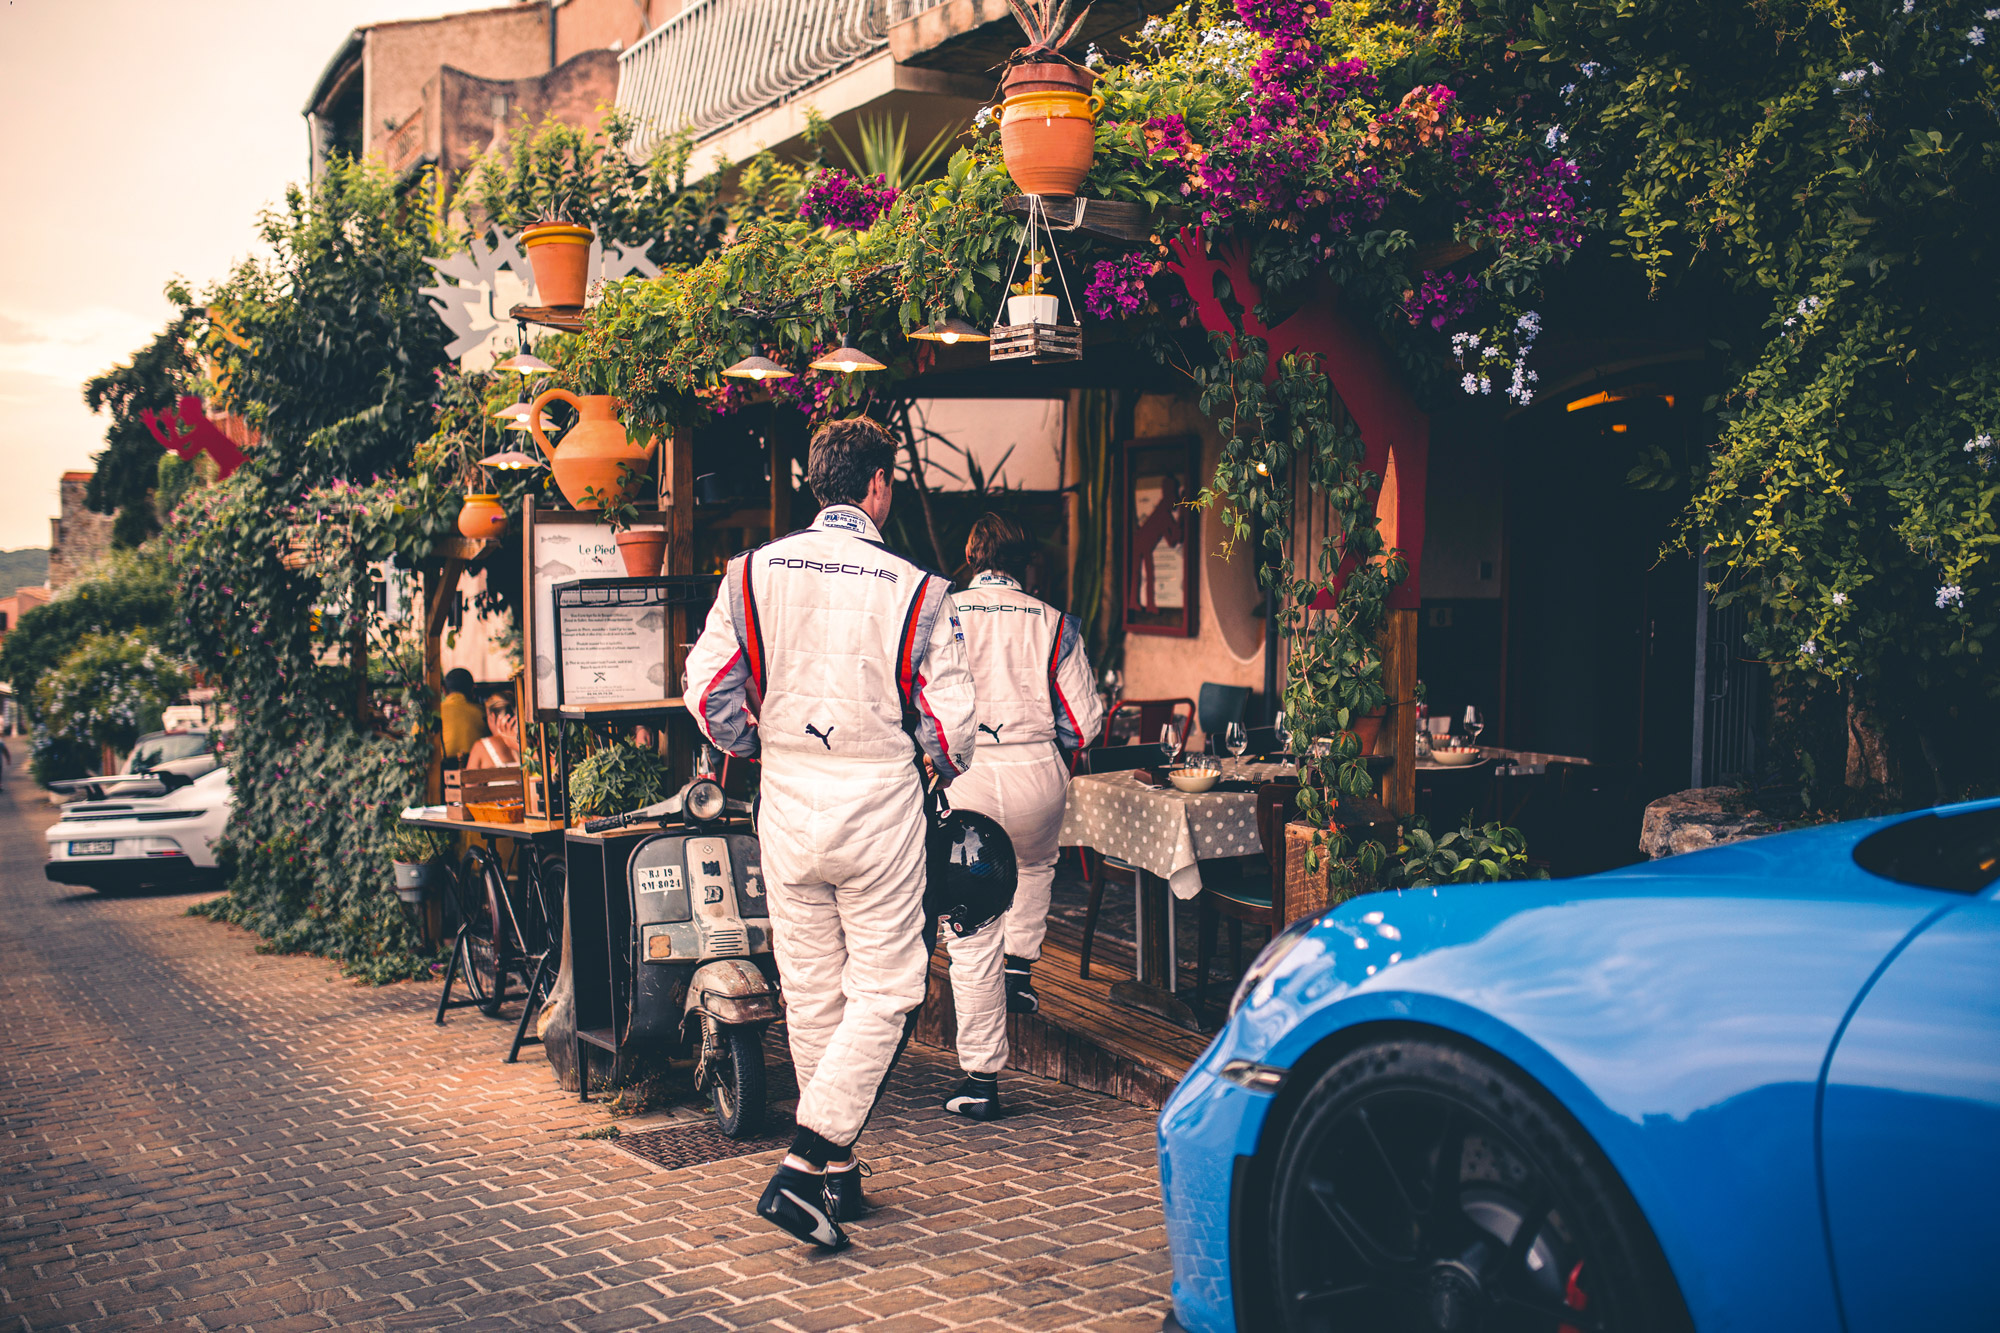 Two men in Porsche racesuits walking into a French restaurant